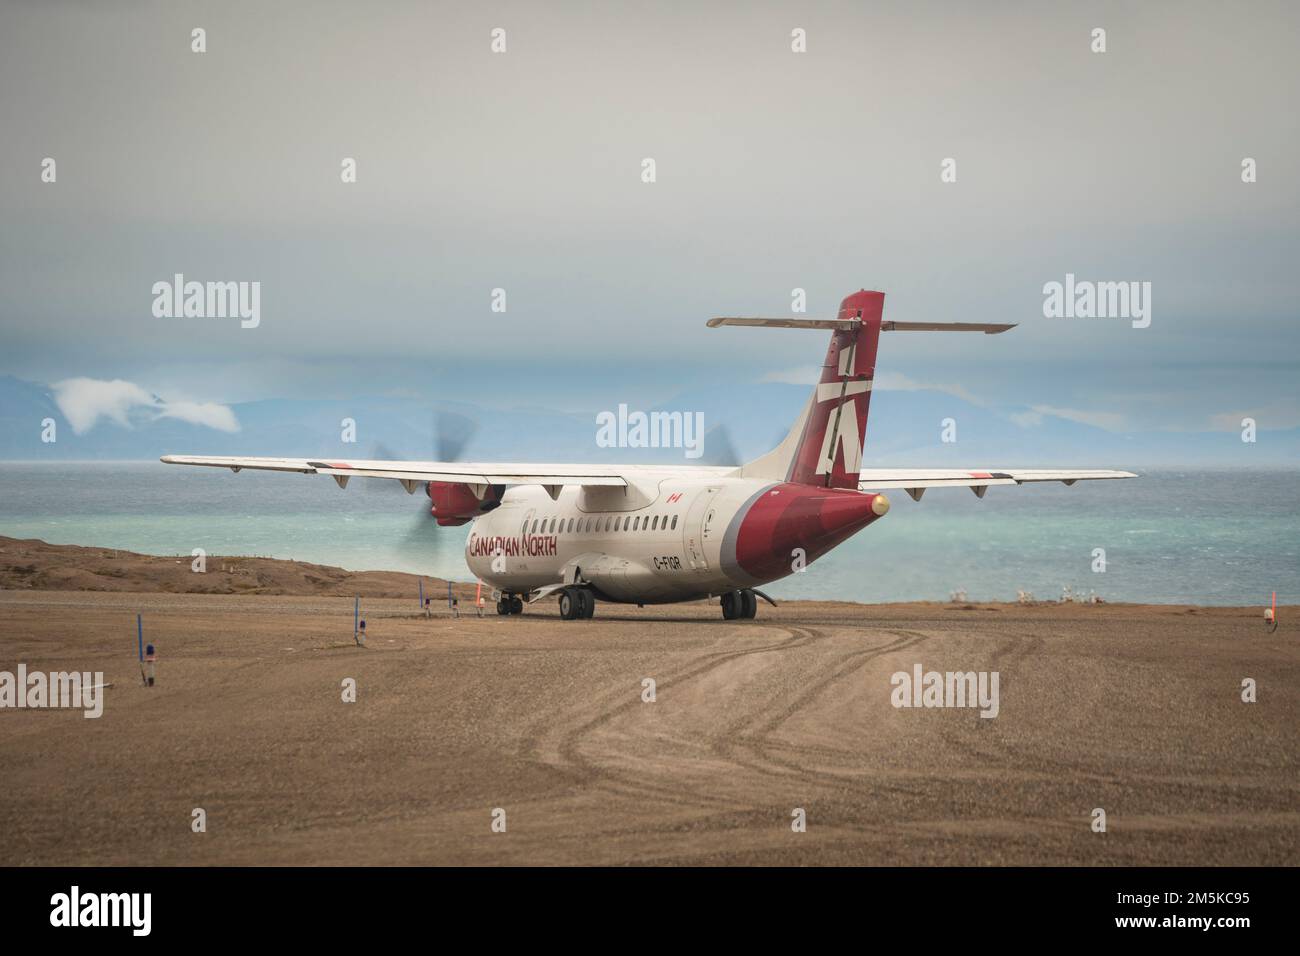 ATR 72 cargo and passenger aircraft belonging to Canadian North Airlines on the gravel airstrip at Pond Inlet, Baffin Island, Nunavut, Canada. Stock Photo